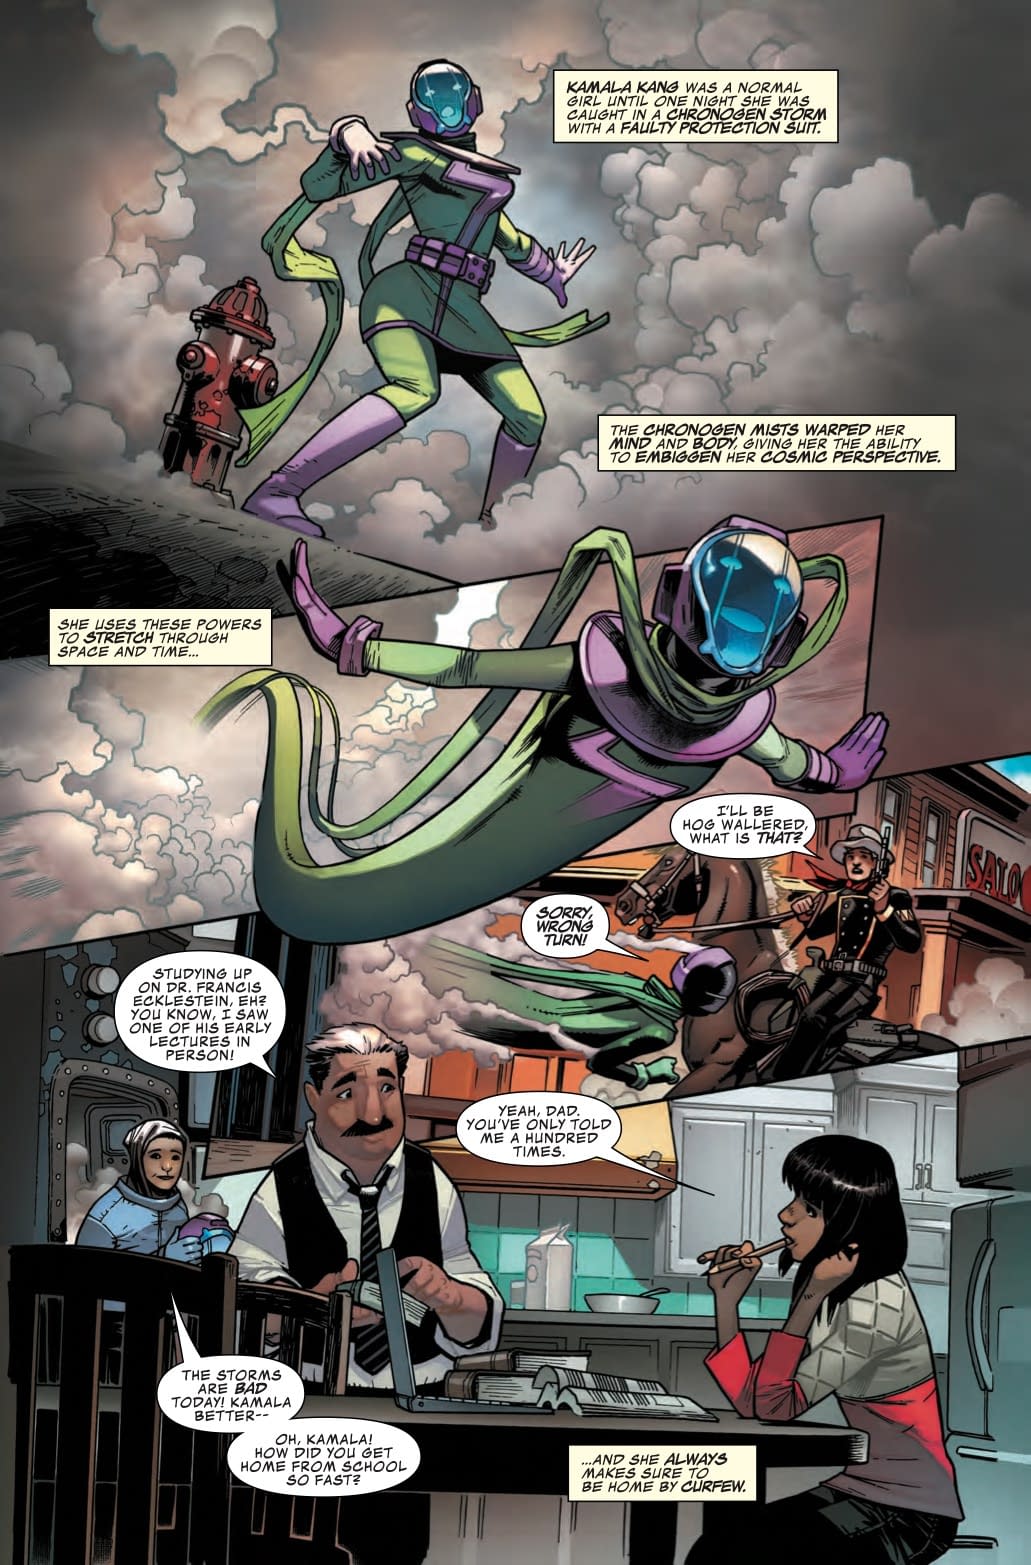 Kamala Kang Makes a Classic Time Travel Mistake in Next Week's Infinity Warps #2